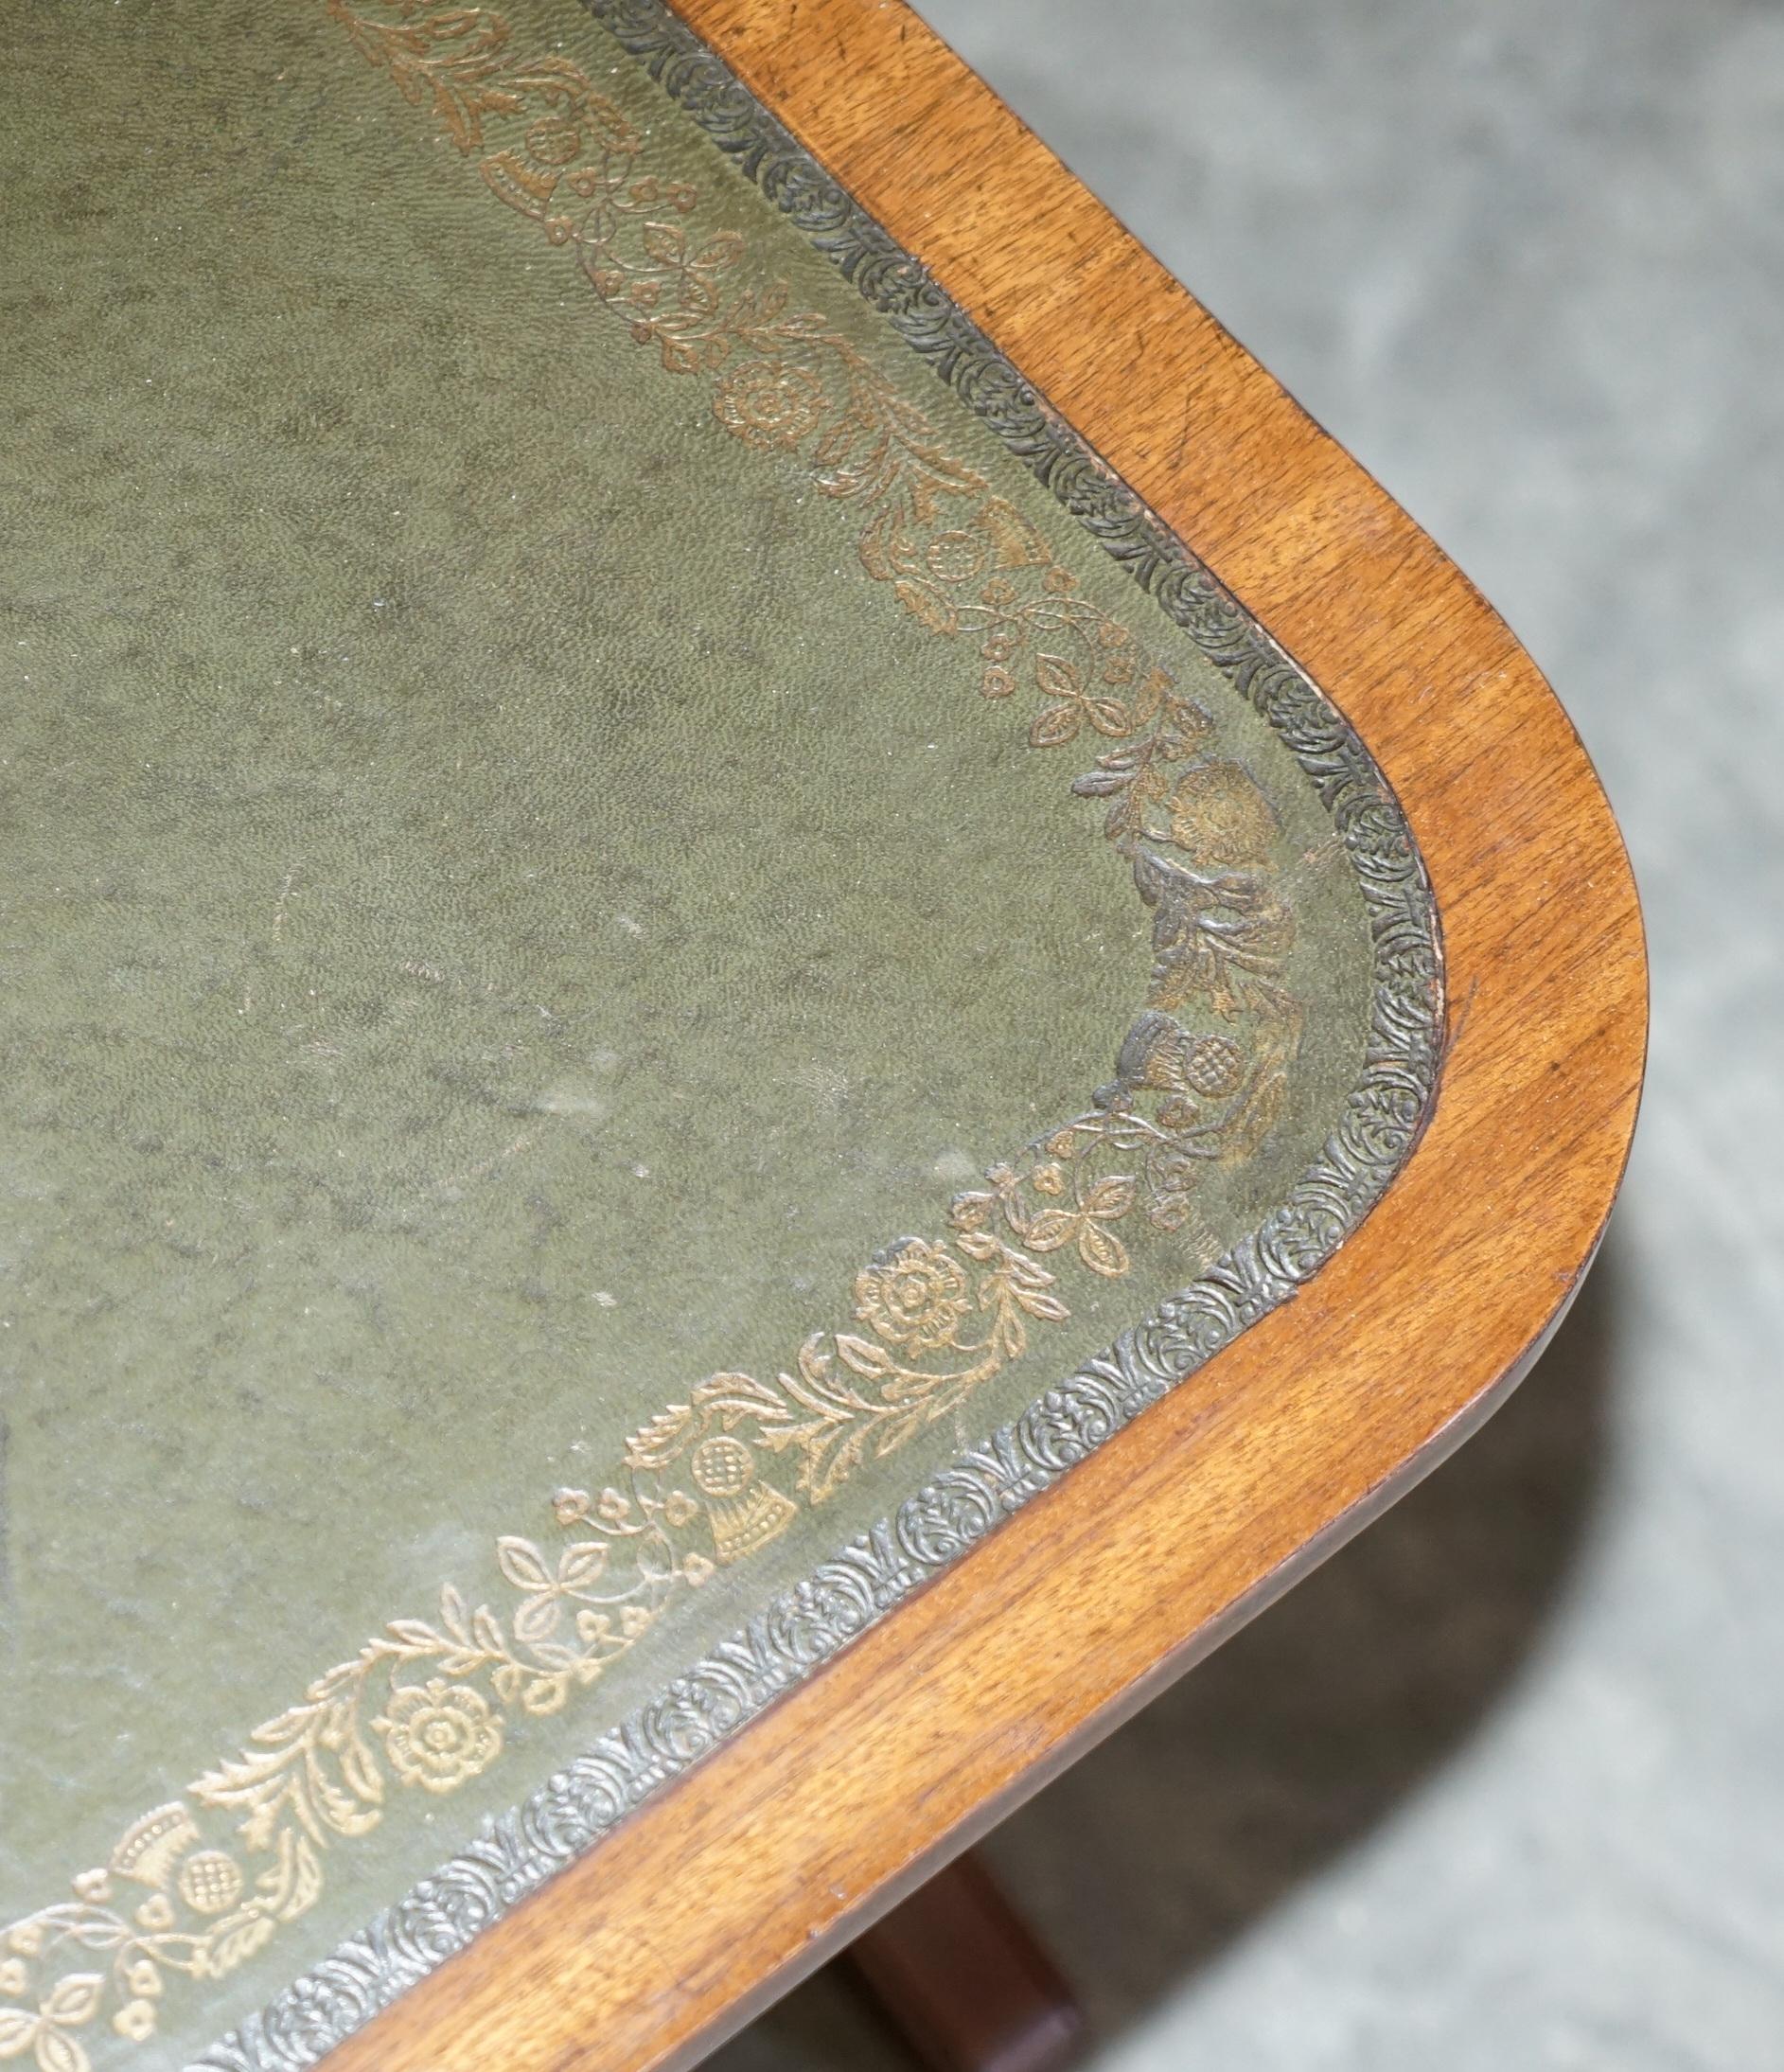 Medium Sized Green Leather & Hardwood Bevan Funnell Coffee Table Nice Patina For Sale 2